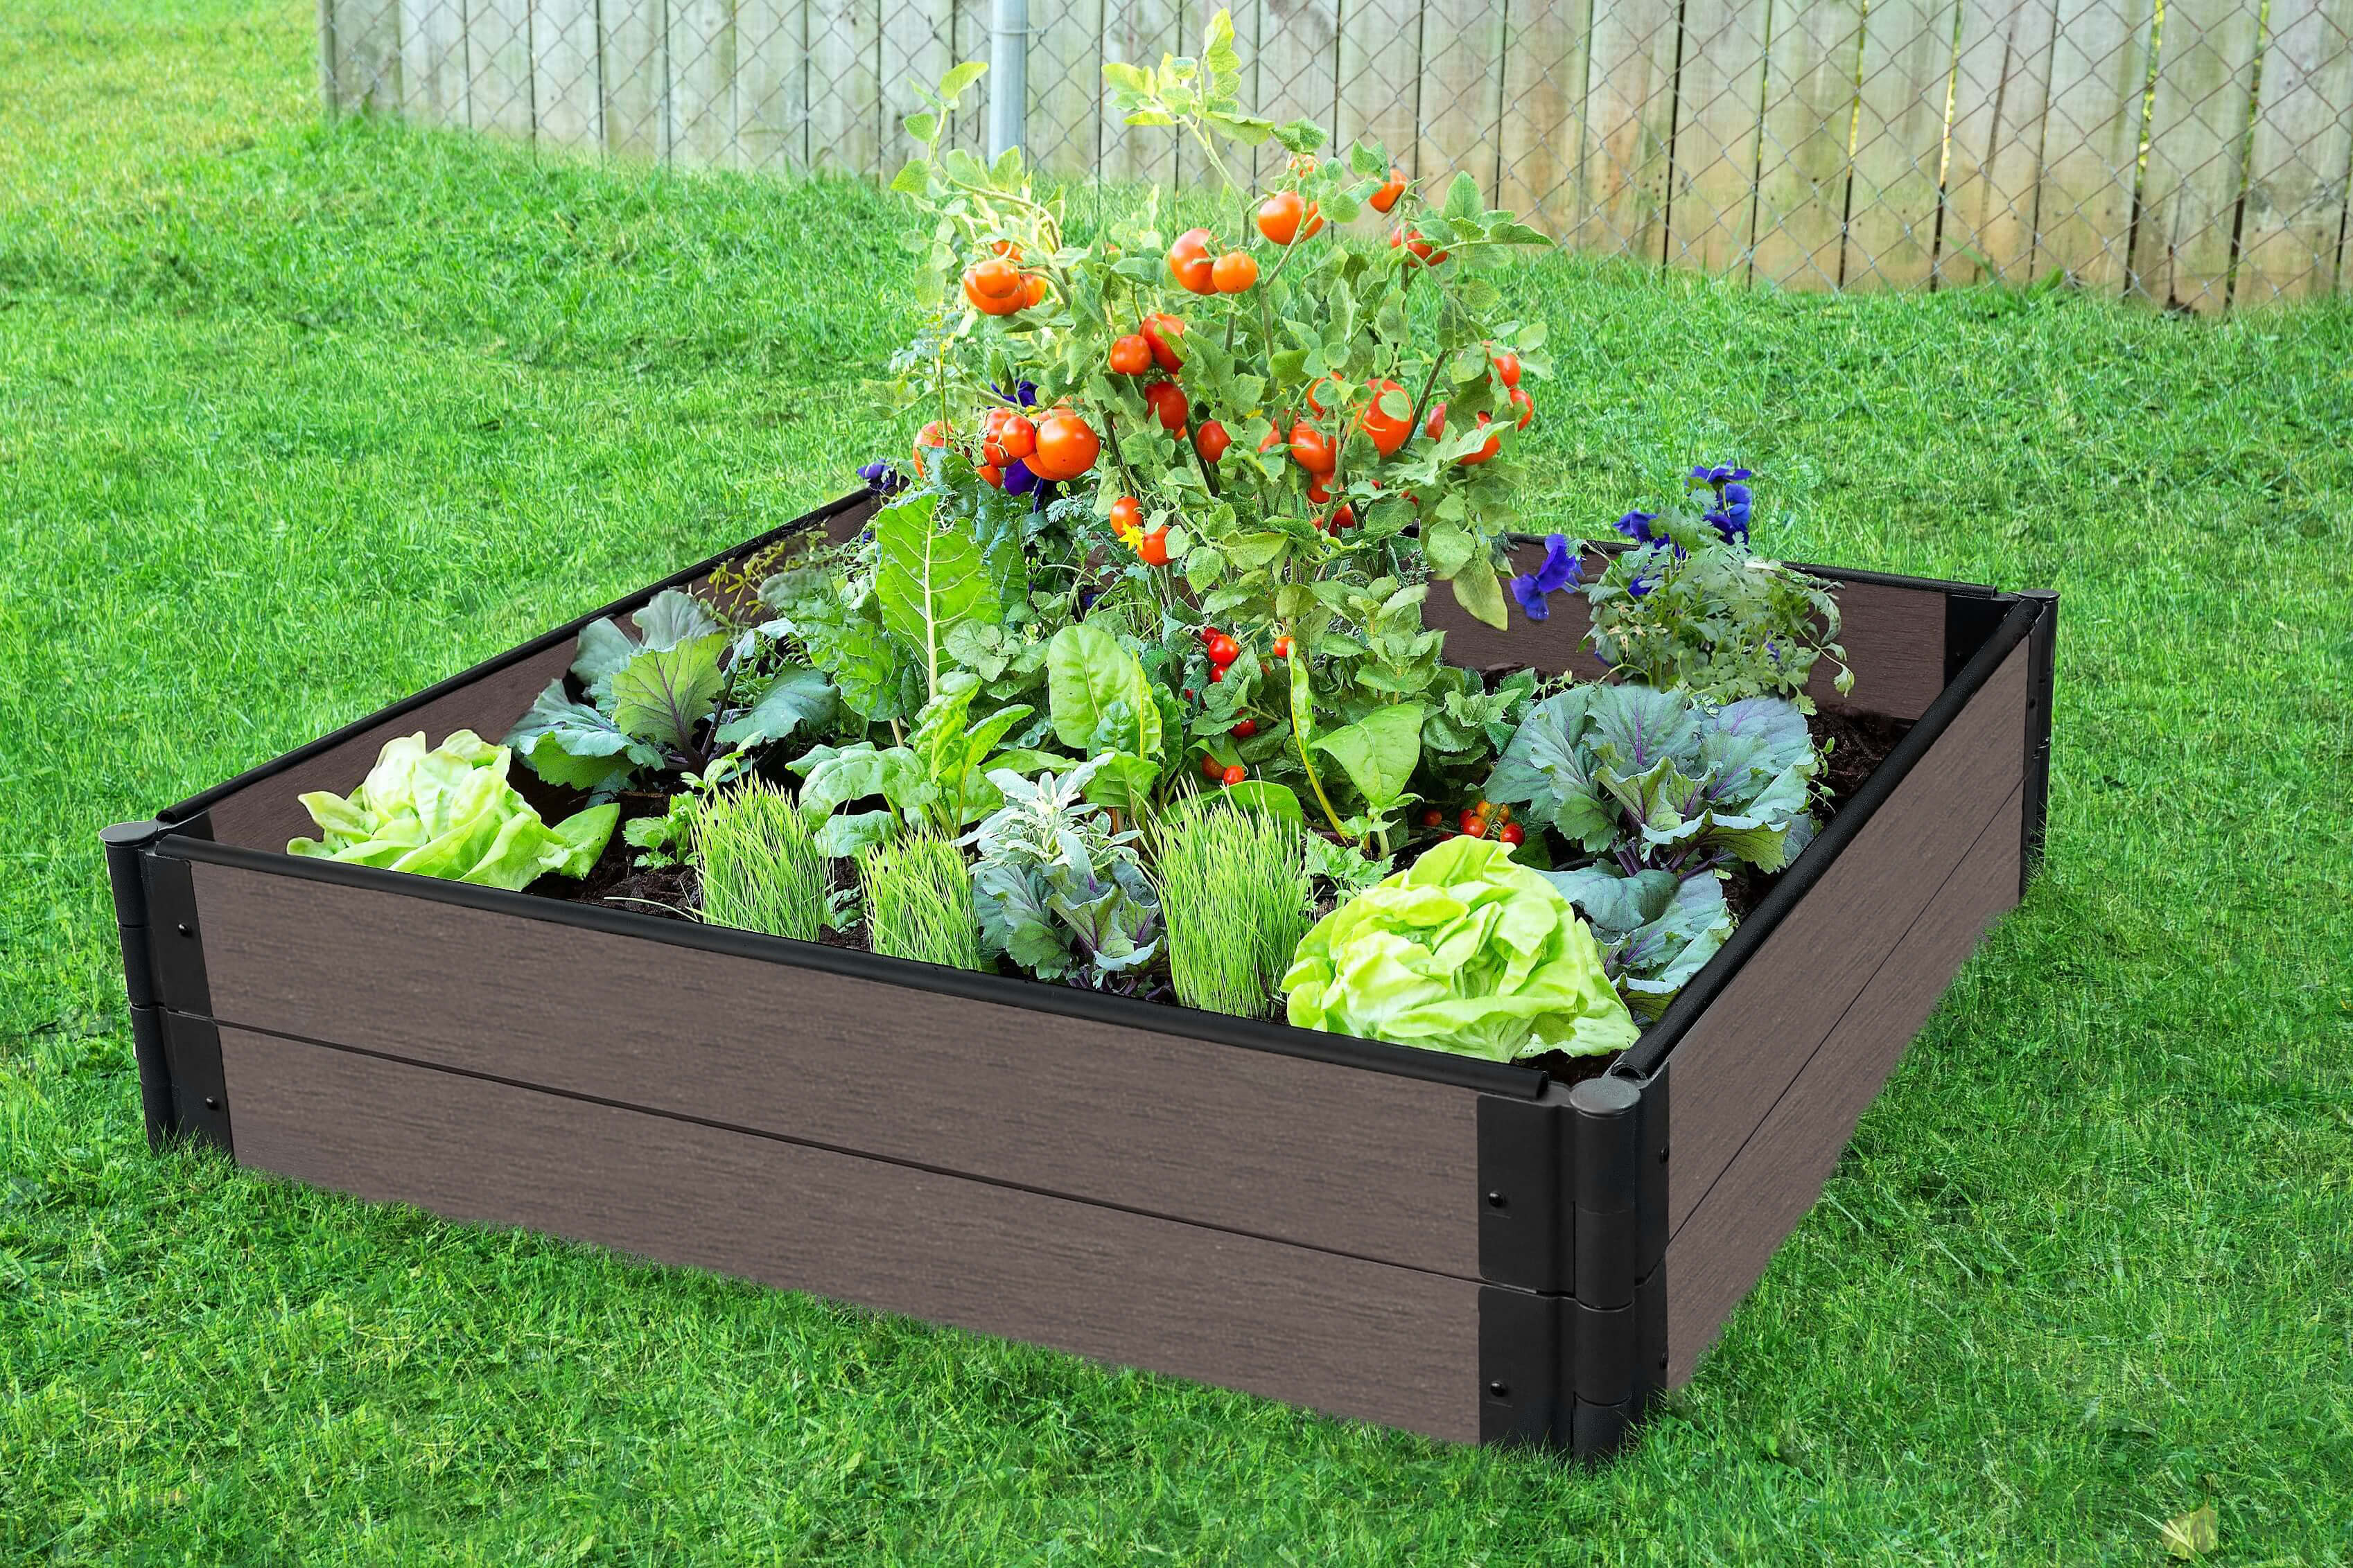 Frame It All Tool-Free Weathered Wood Raised Garden Bed 4' x 4' x 11" - 1" profile